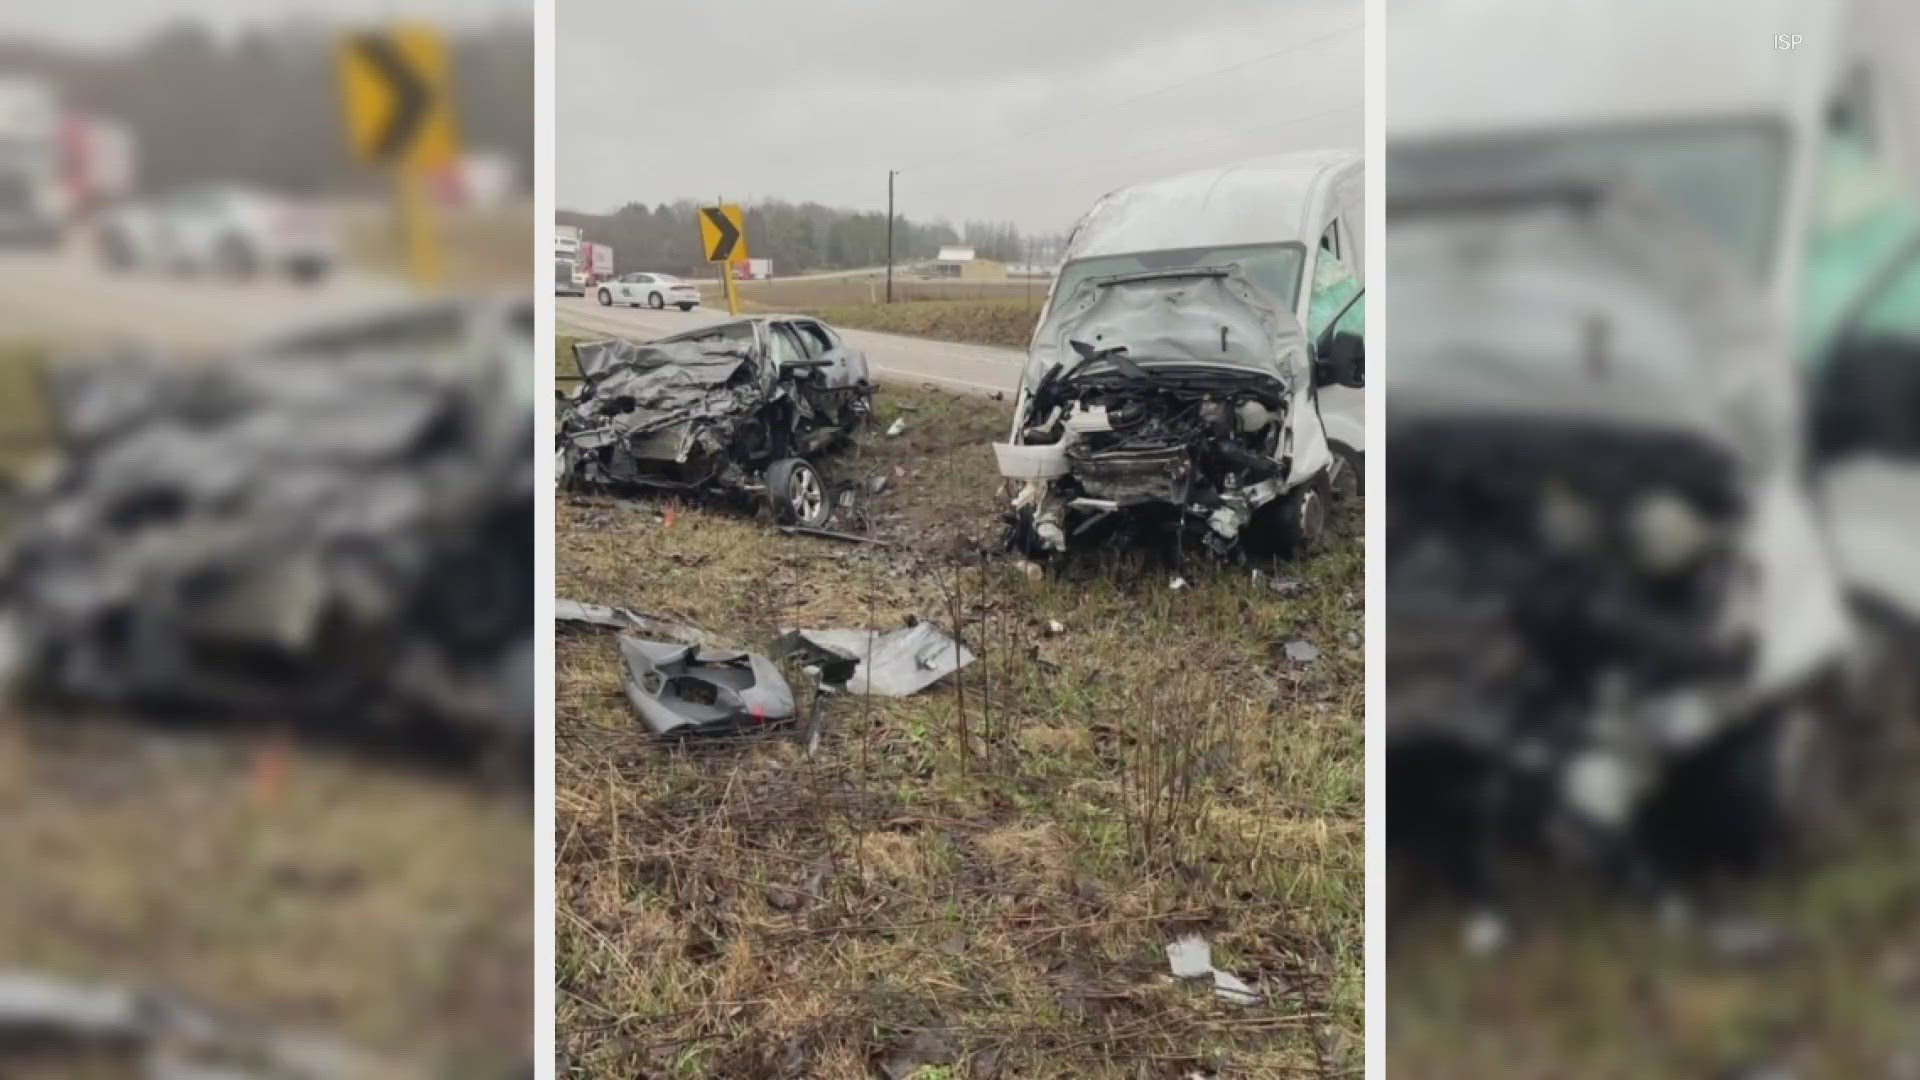 Tiffany Starkey had been hospitalized in critical condition after a two-vehicle crash Friday afternoon on US 35 just south of Mount Pleasant.